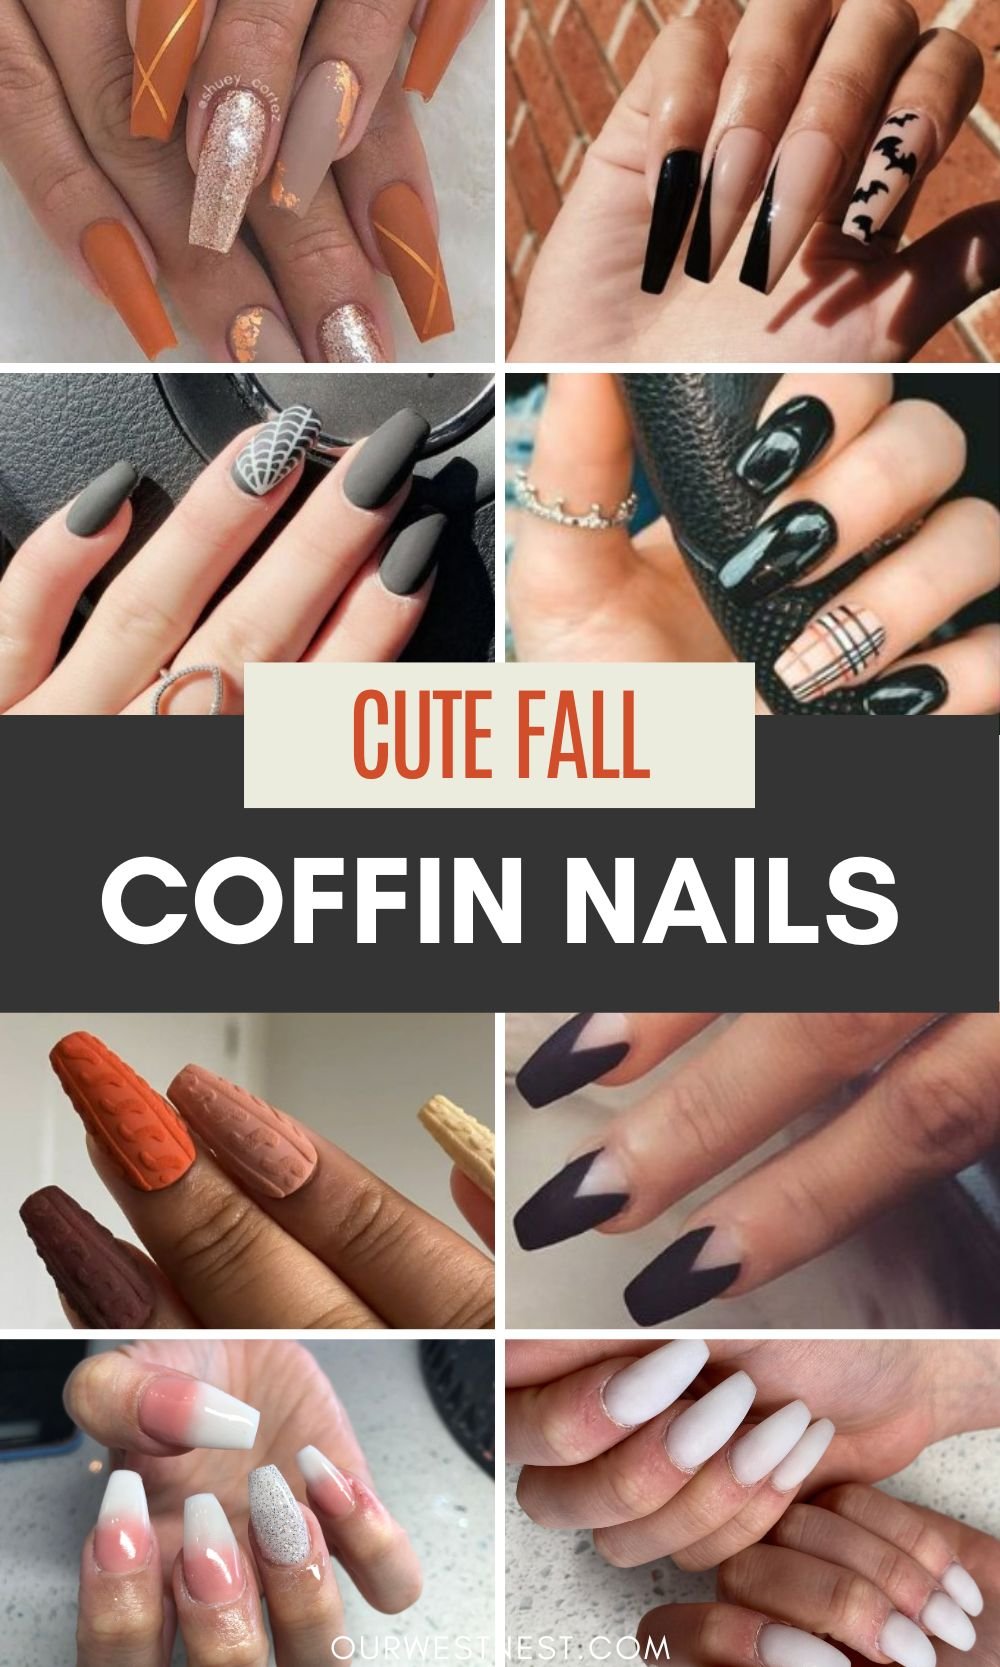 How to Create the Perfect Coffin Nail Shape - YouTube